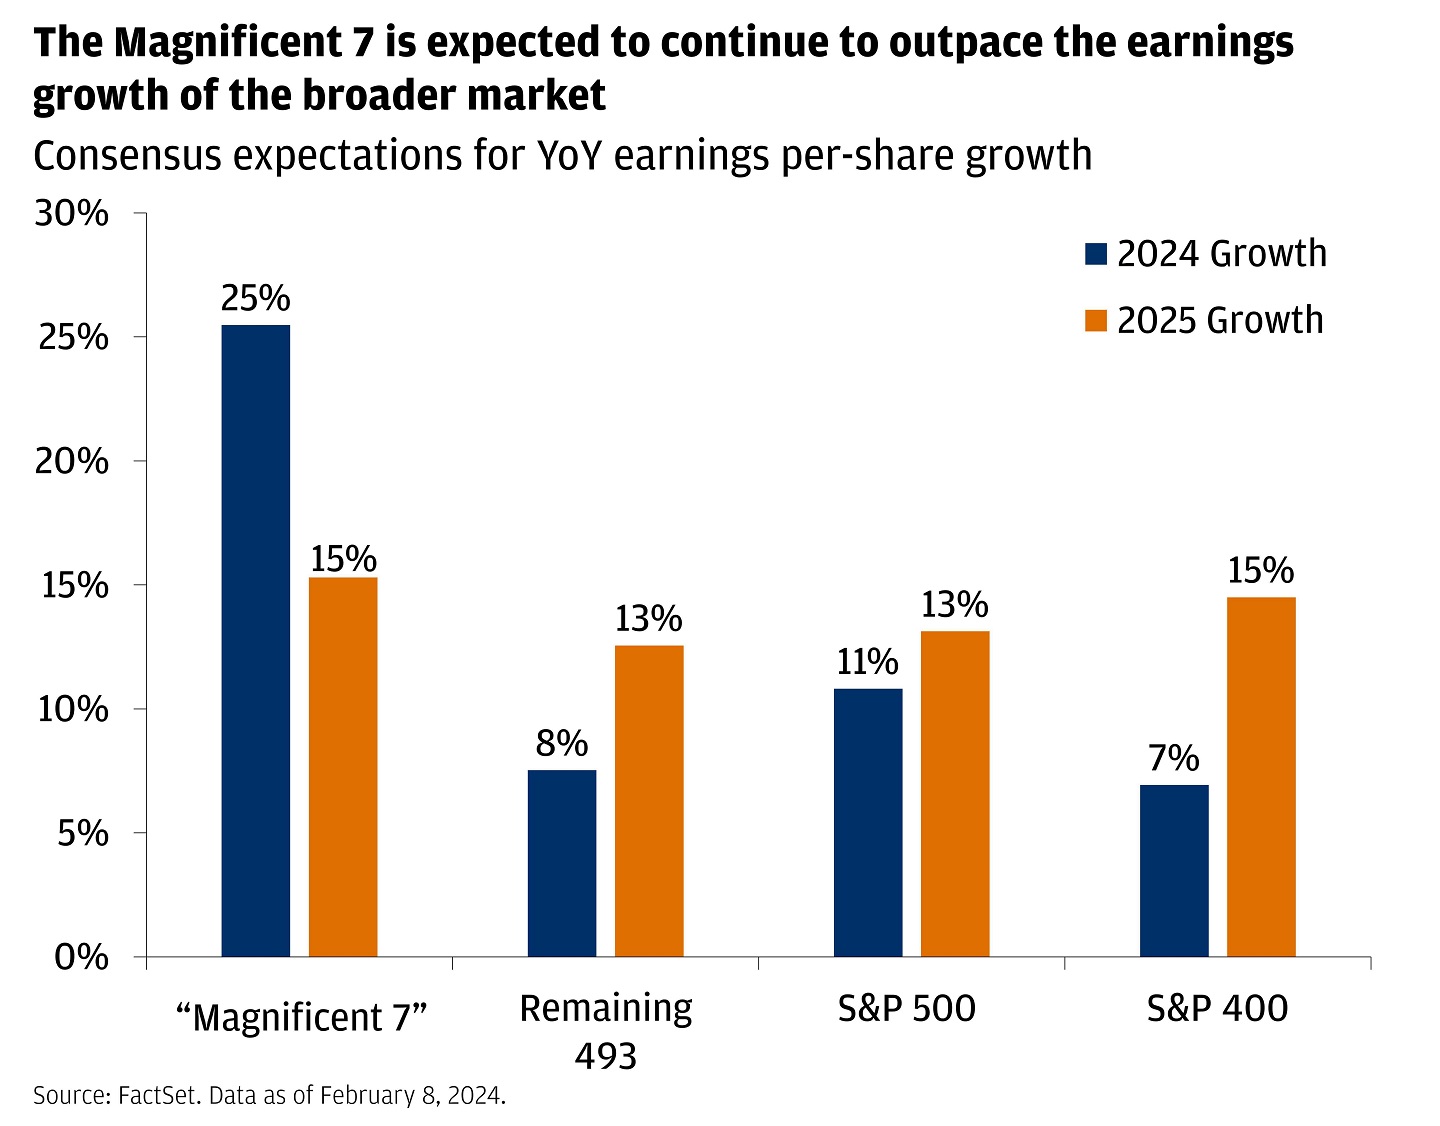 This chart shows YoY earnings per-share growth for the Mag-7, remaining 493, S&P 500, and S&P 400., for 2024 and 2025.